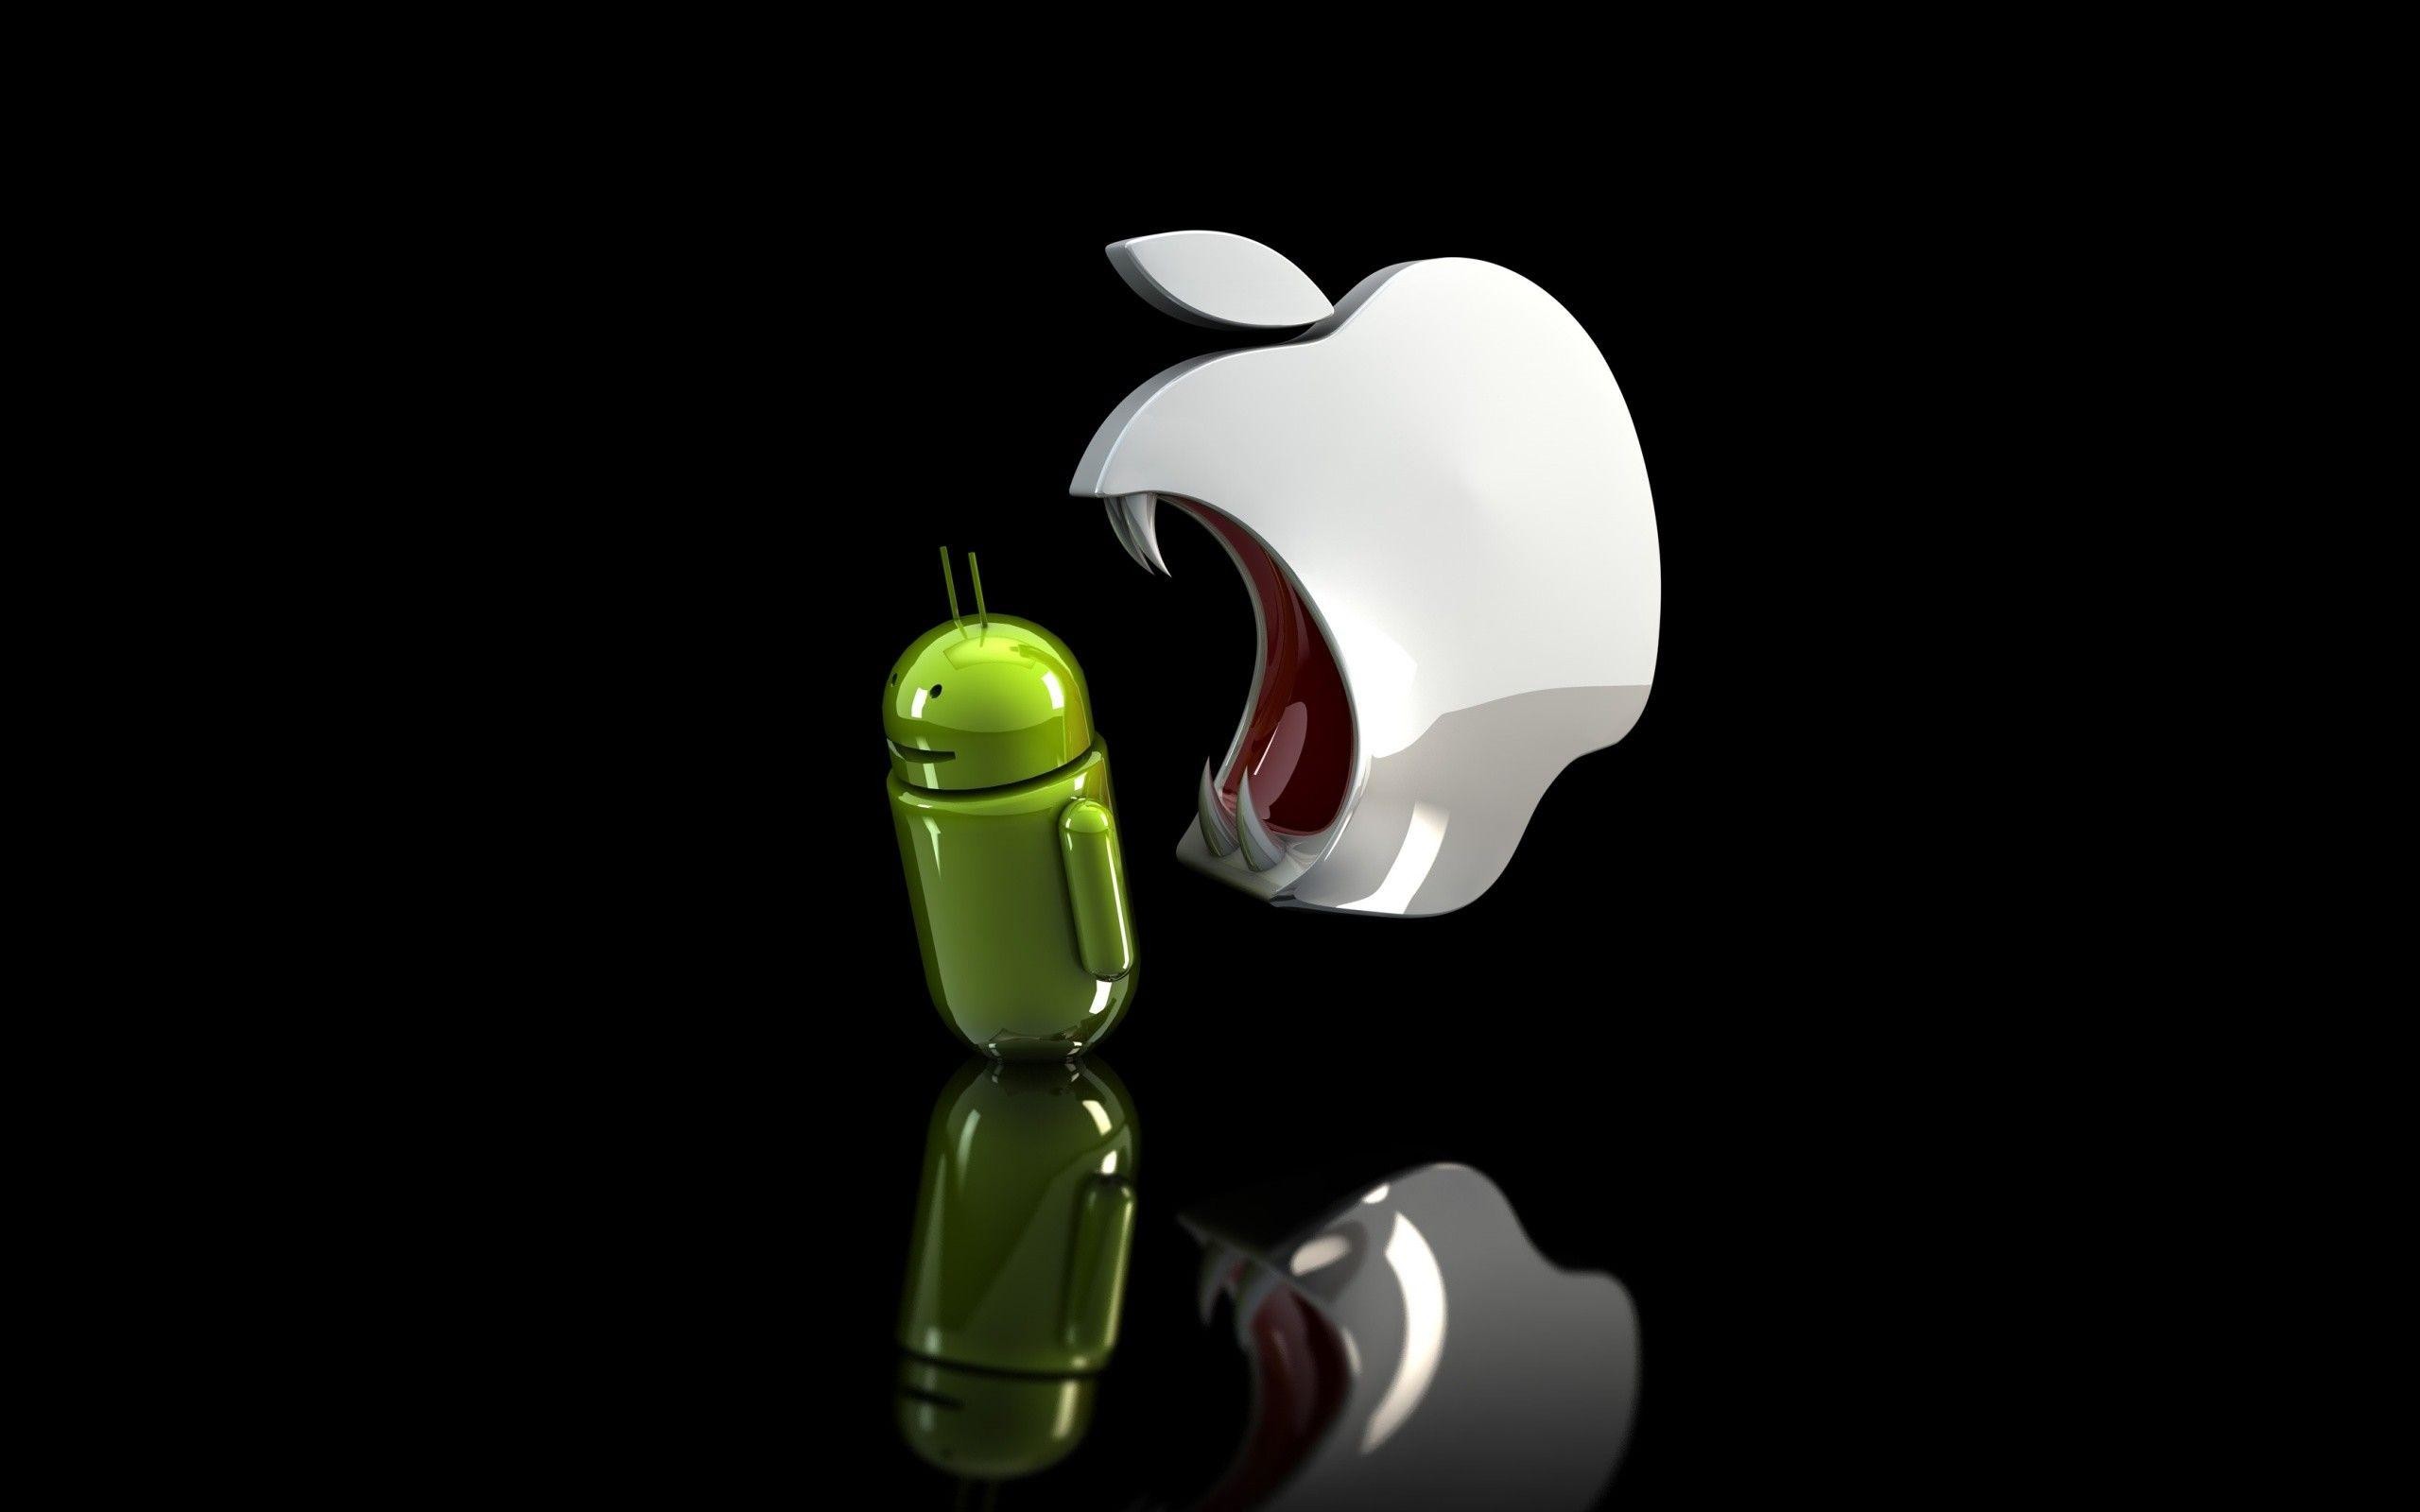 2560x1600, Wallpapers For > Android Vs Apple Wallpaper - Apple Eating Android - HD Wallpaper 